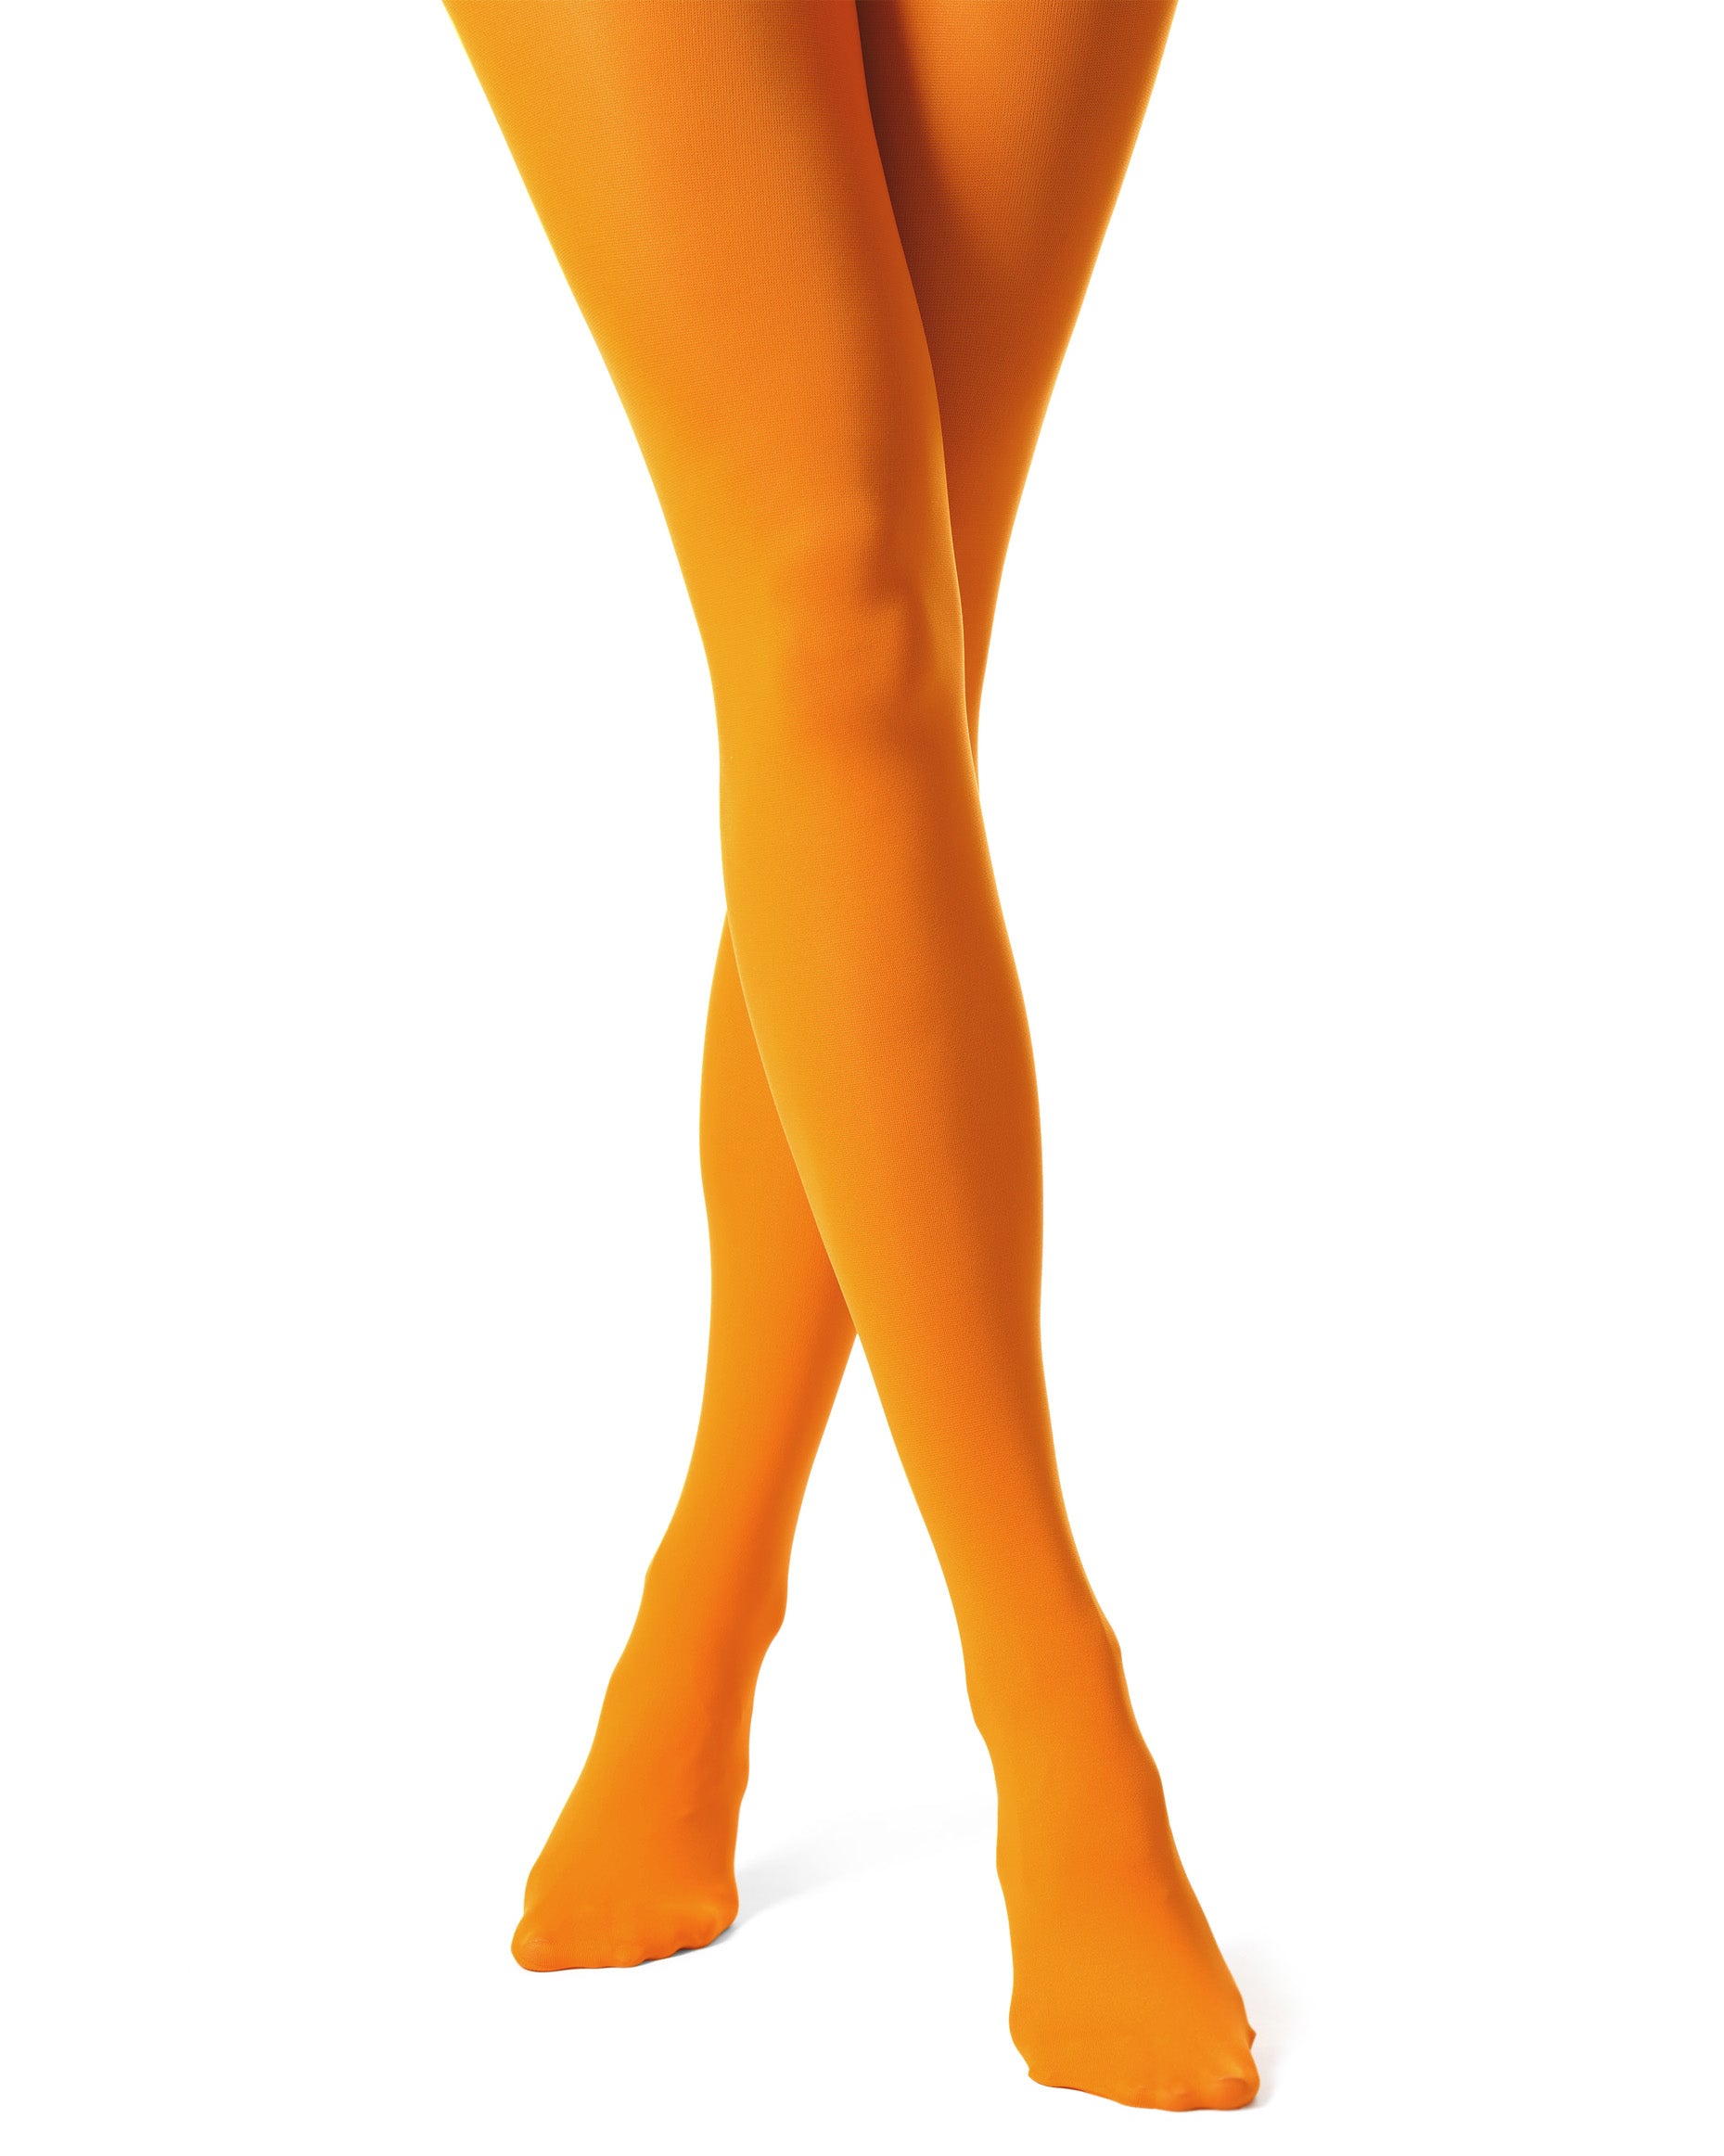 Trasparenze Sophie 70 Collant - coloured opaque tights in light orange (paprika)